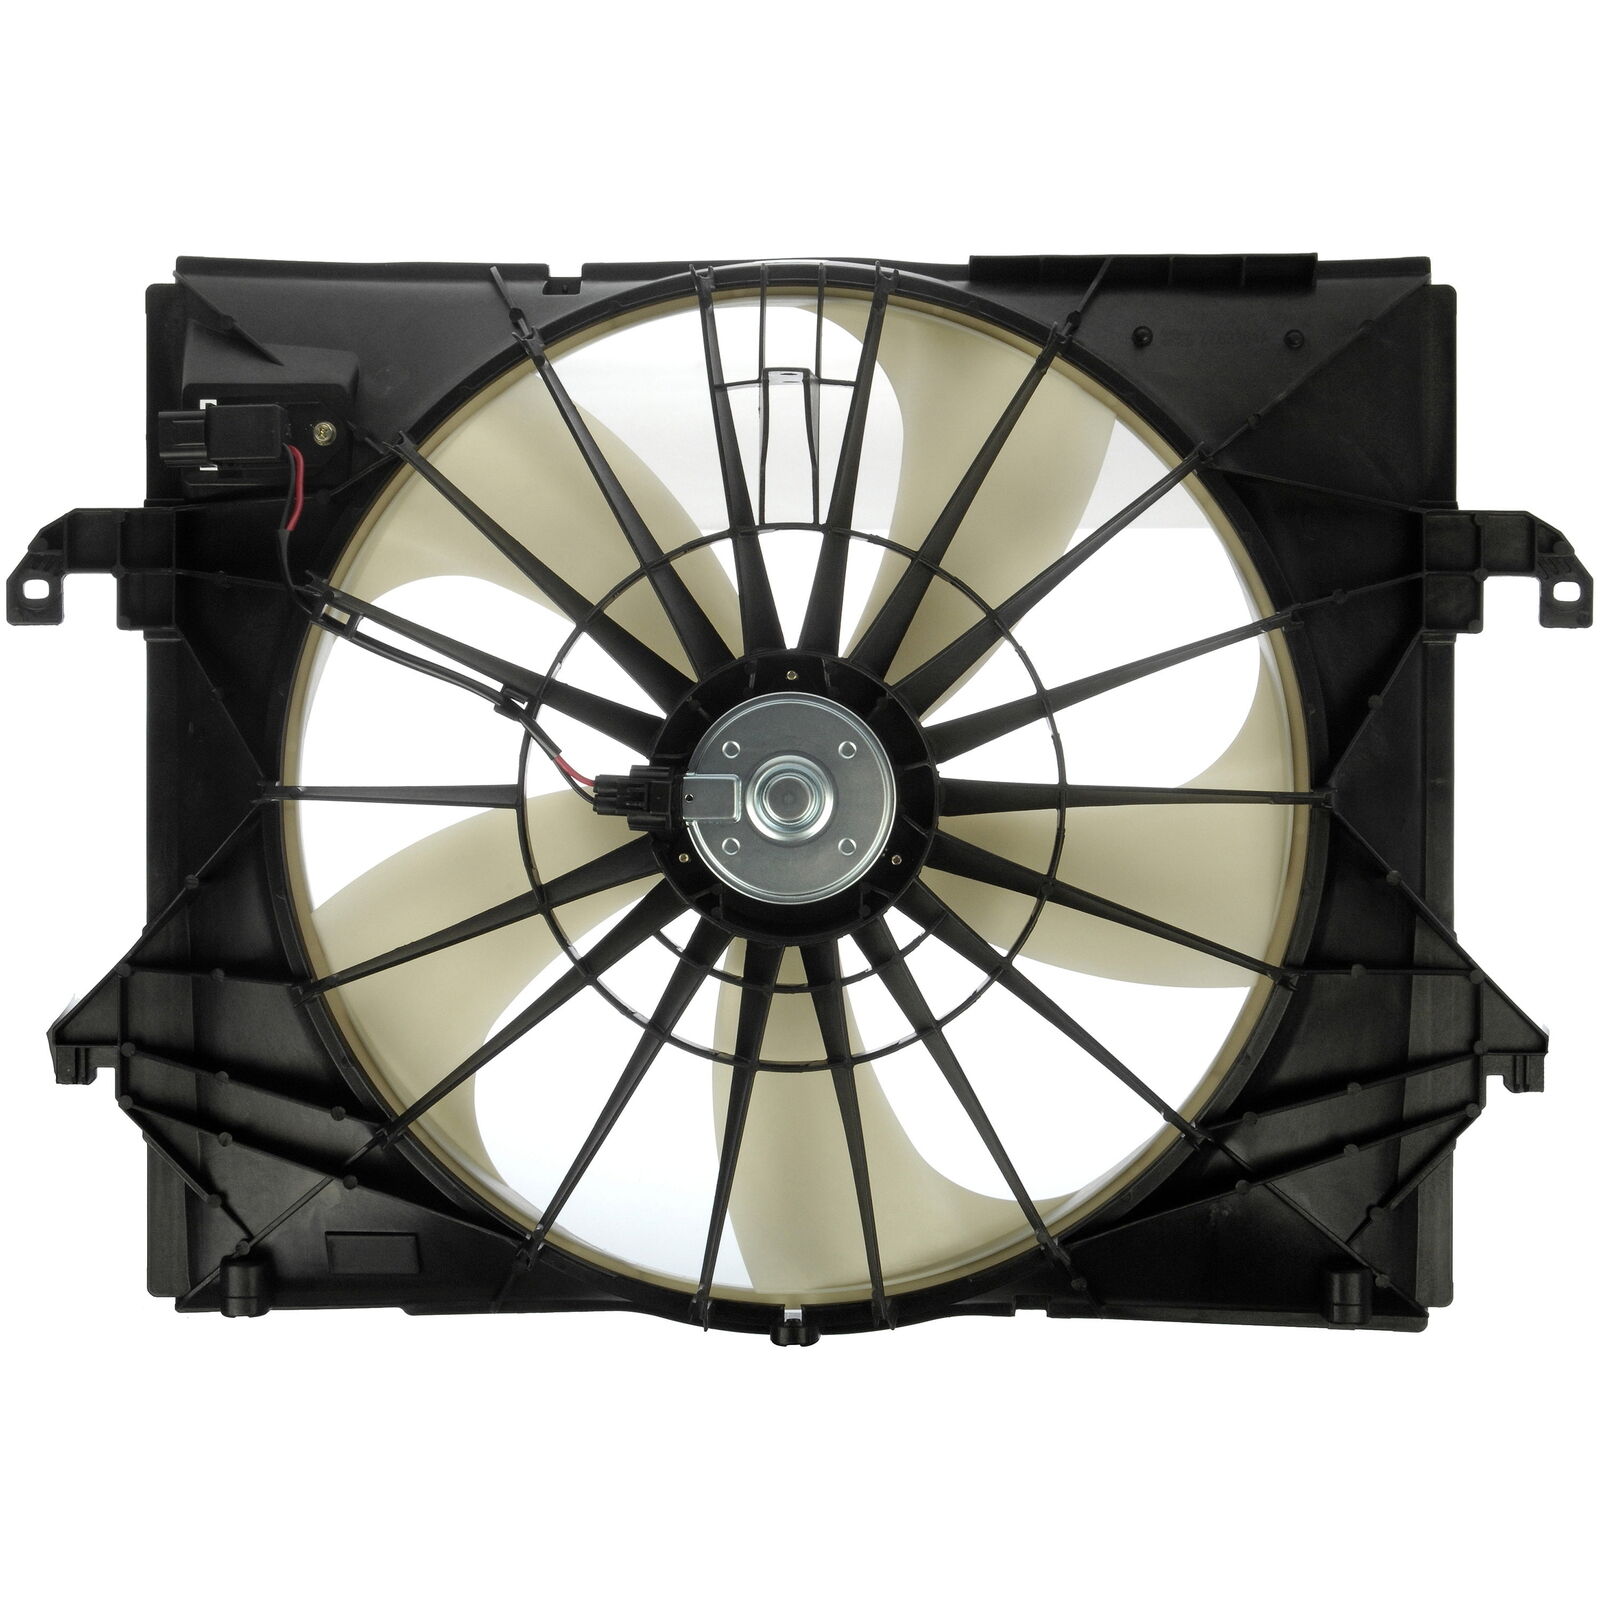 621-410 Engine Cooling Fan Assembly for Specific Dodge / Ram Models Fits select